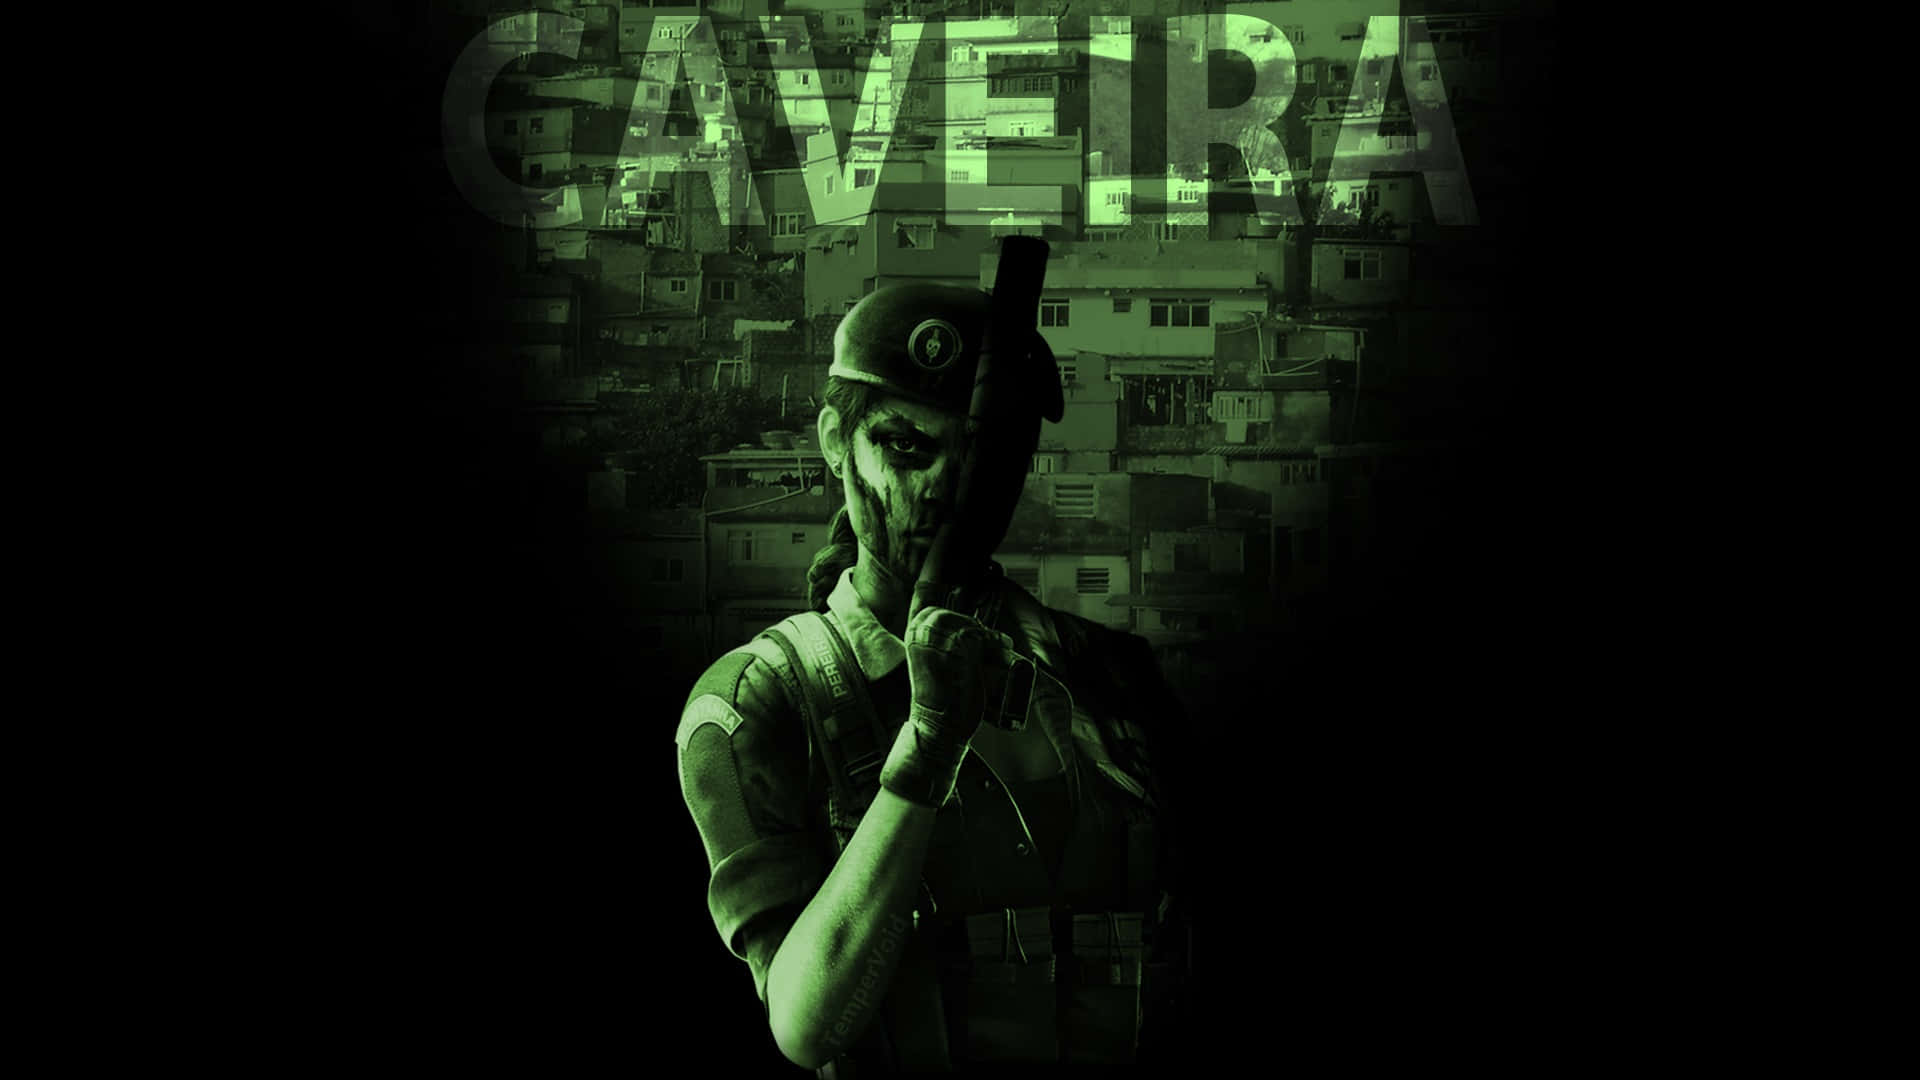 Caveira in action: Stealth and Interrogation Skills in Rainbow Six Siege Wallpaper